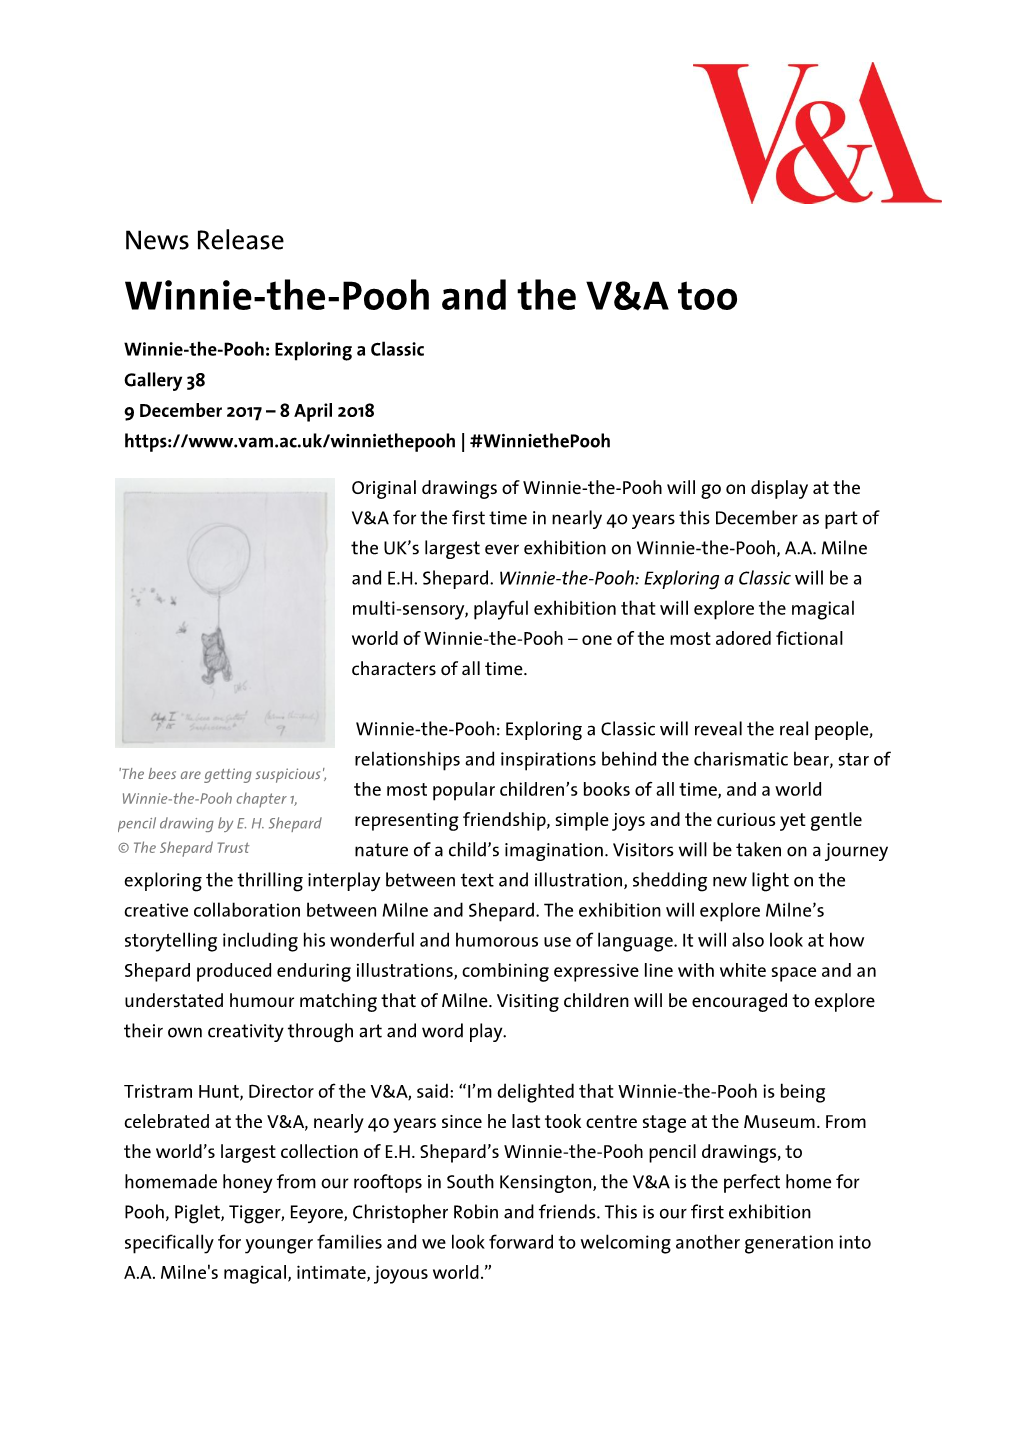 Winnie-The-Pooh and the V&A